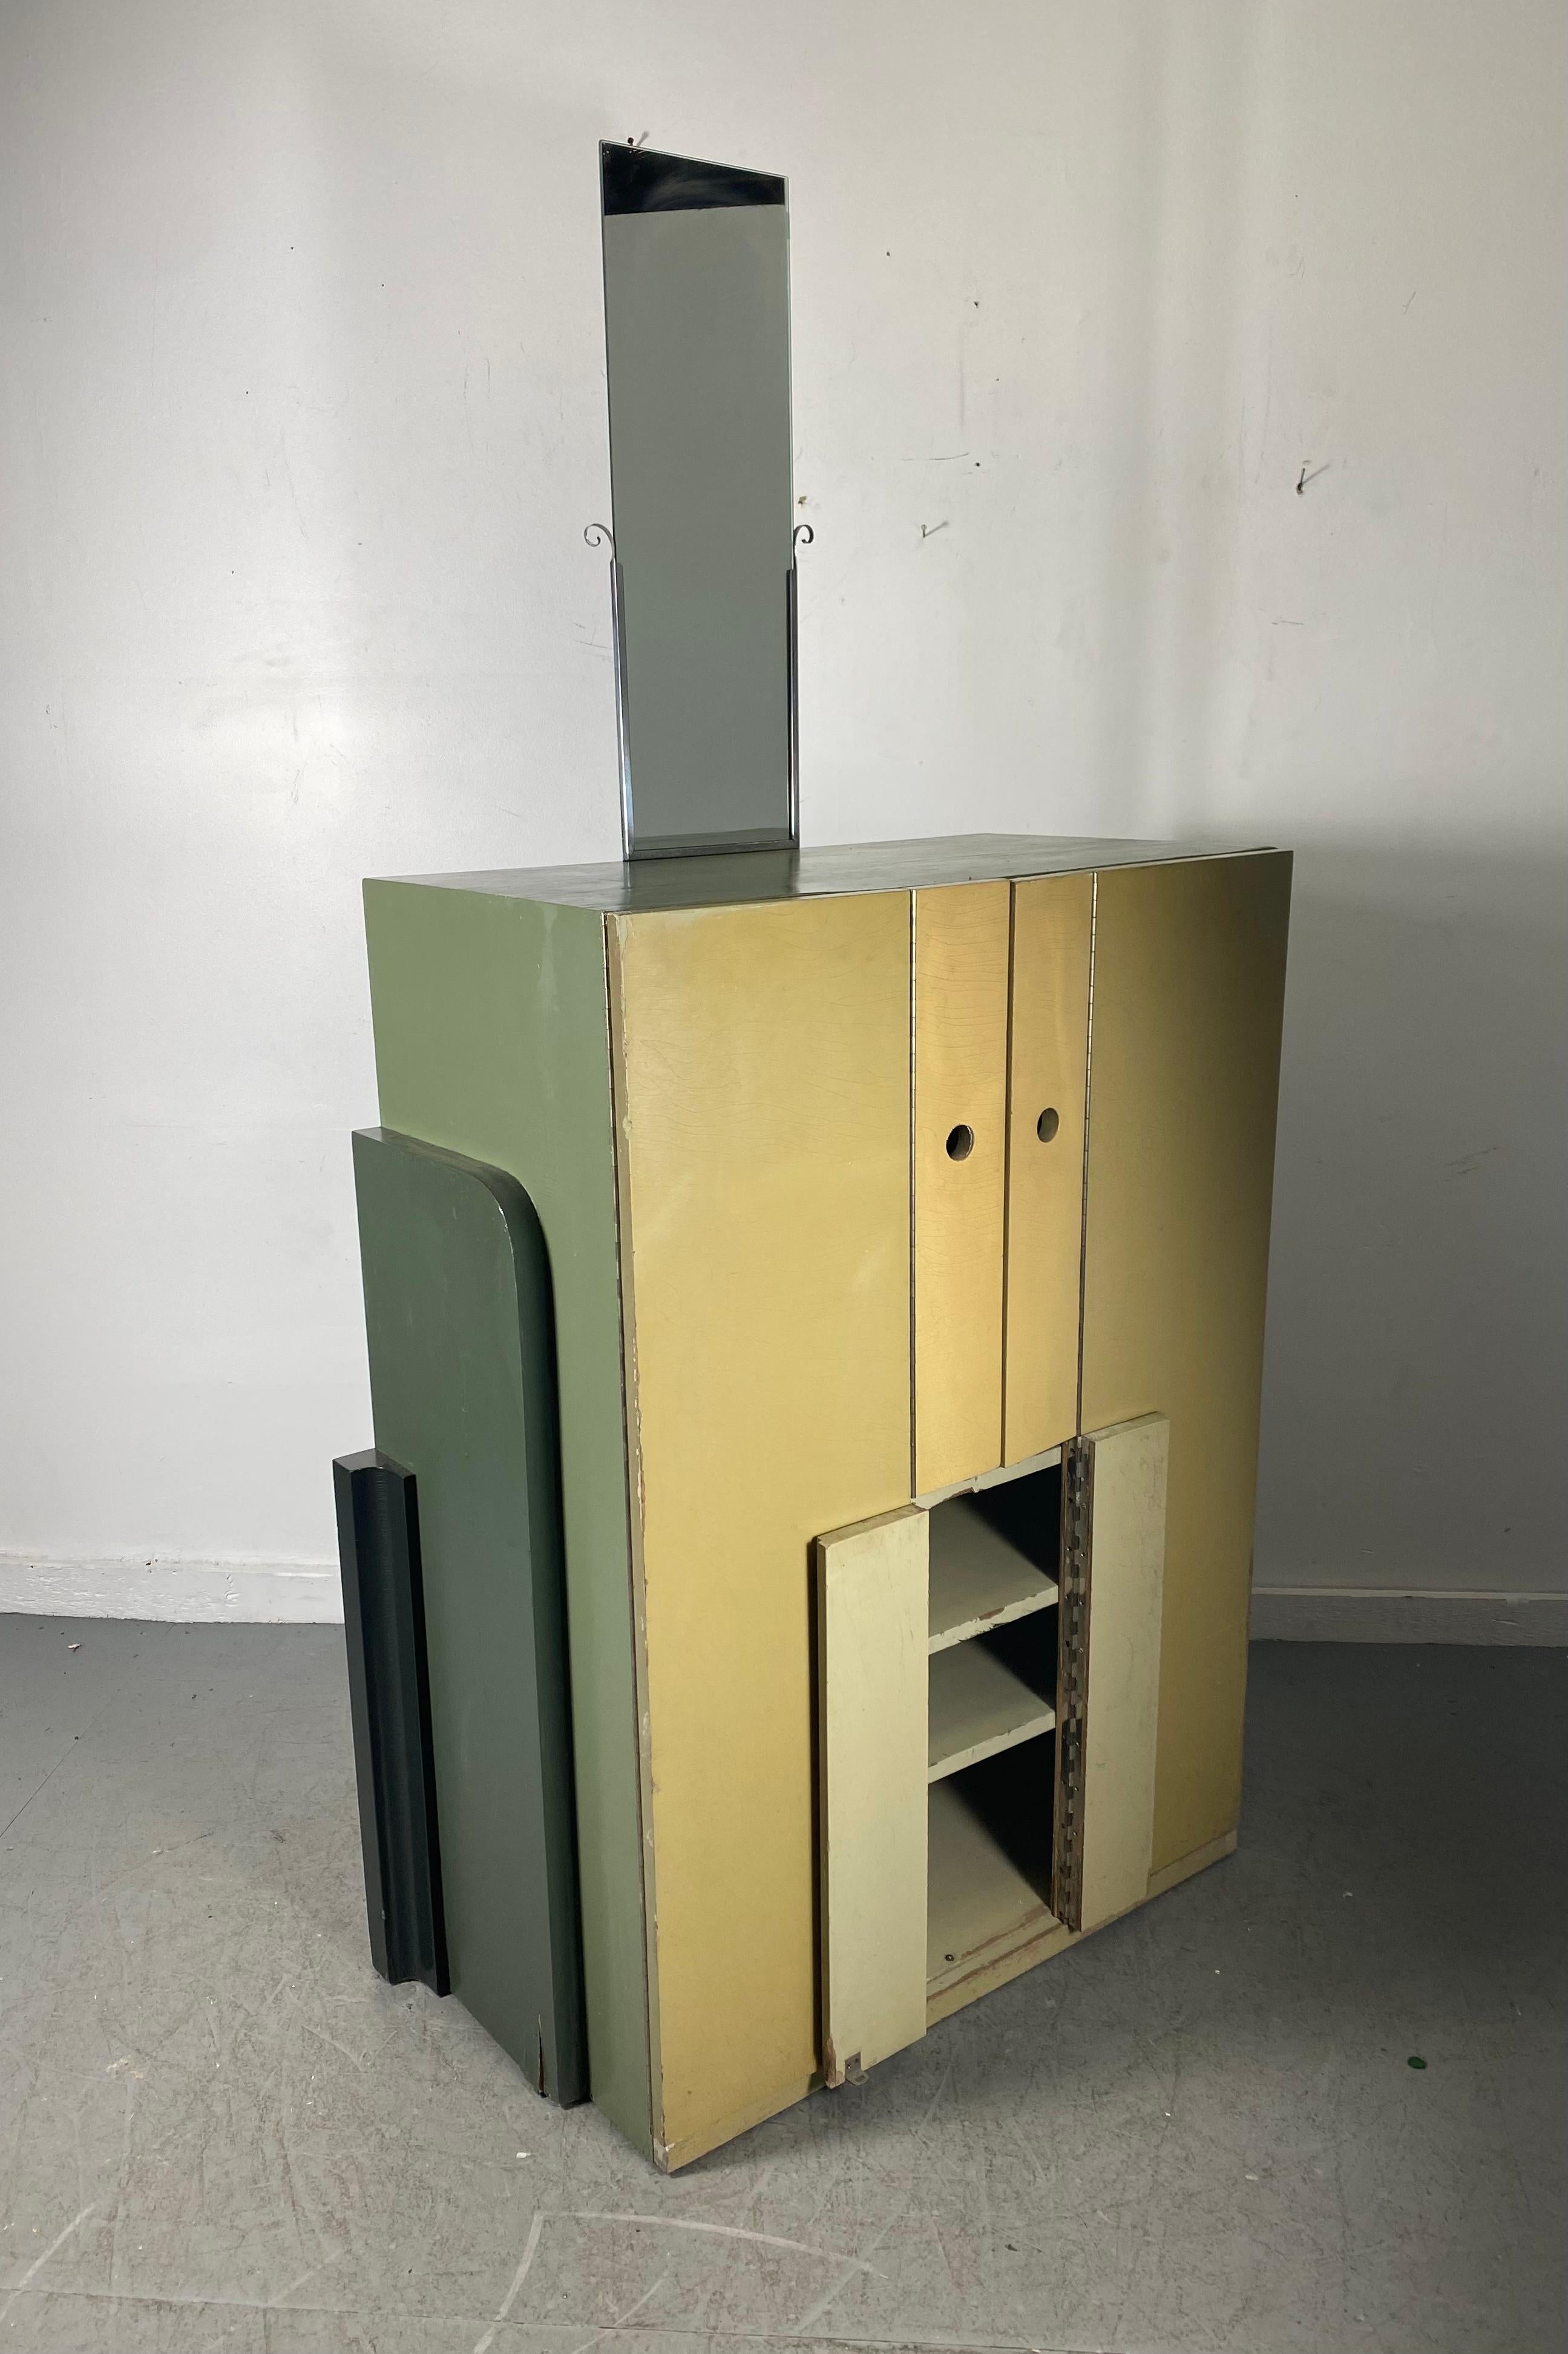 Rare Custom Art Deco, Bauhaus cabinet with removable mirror and ingenious double hinged doors with circular cutout pulls, Designed by architect and designer Jules Buoy, Made for Carlo's Salzedo's Summer Harp Colony in Camden , Maine, Amazing design,